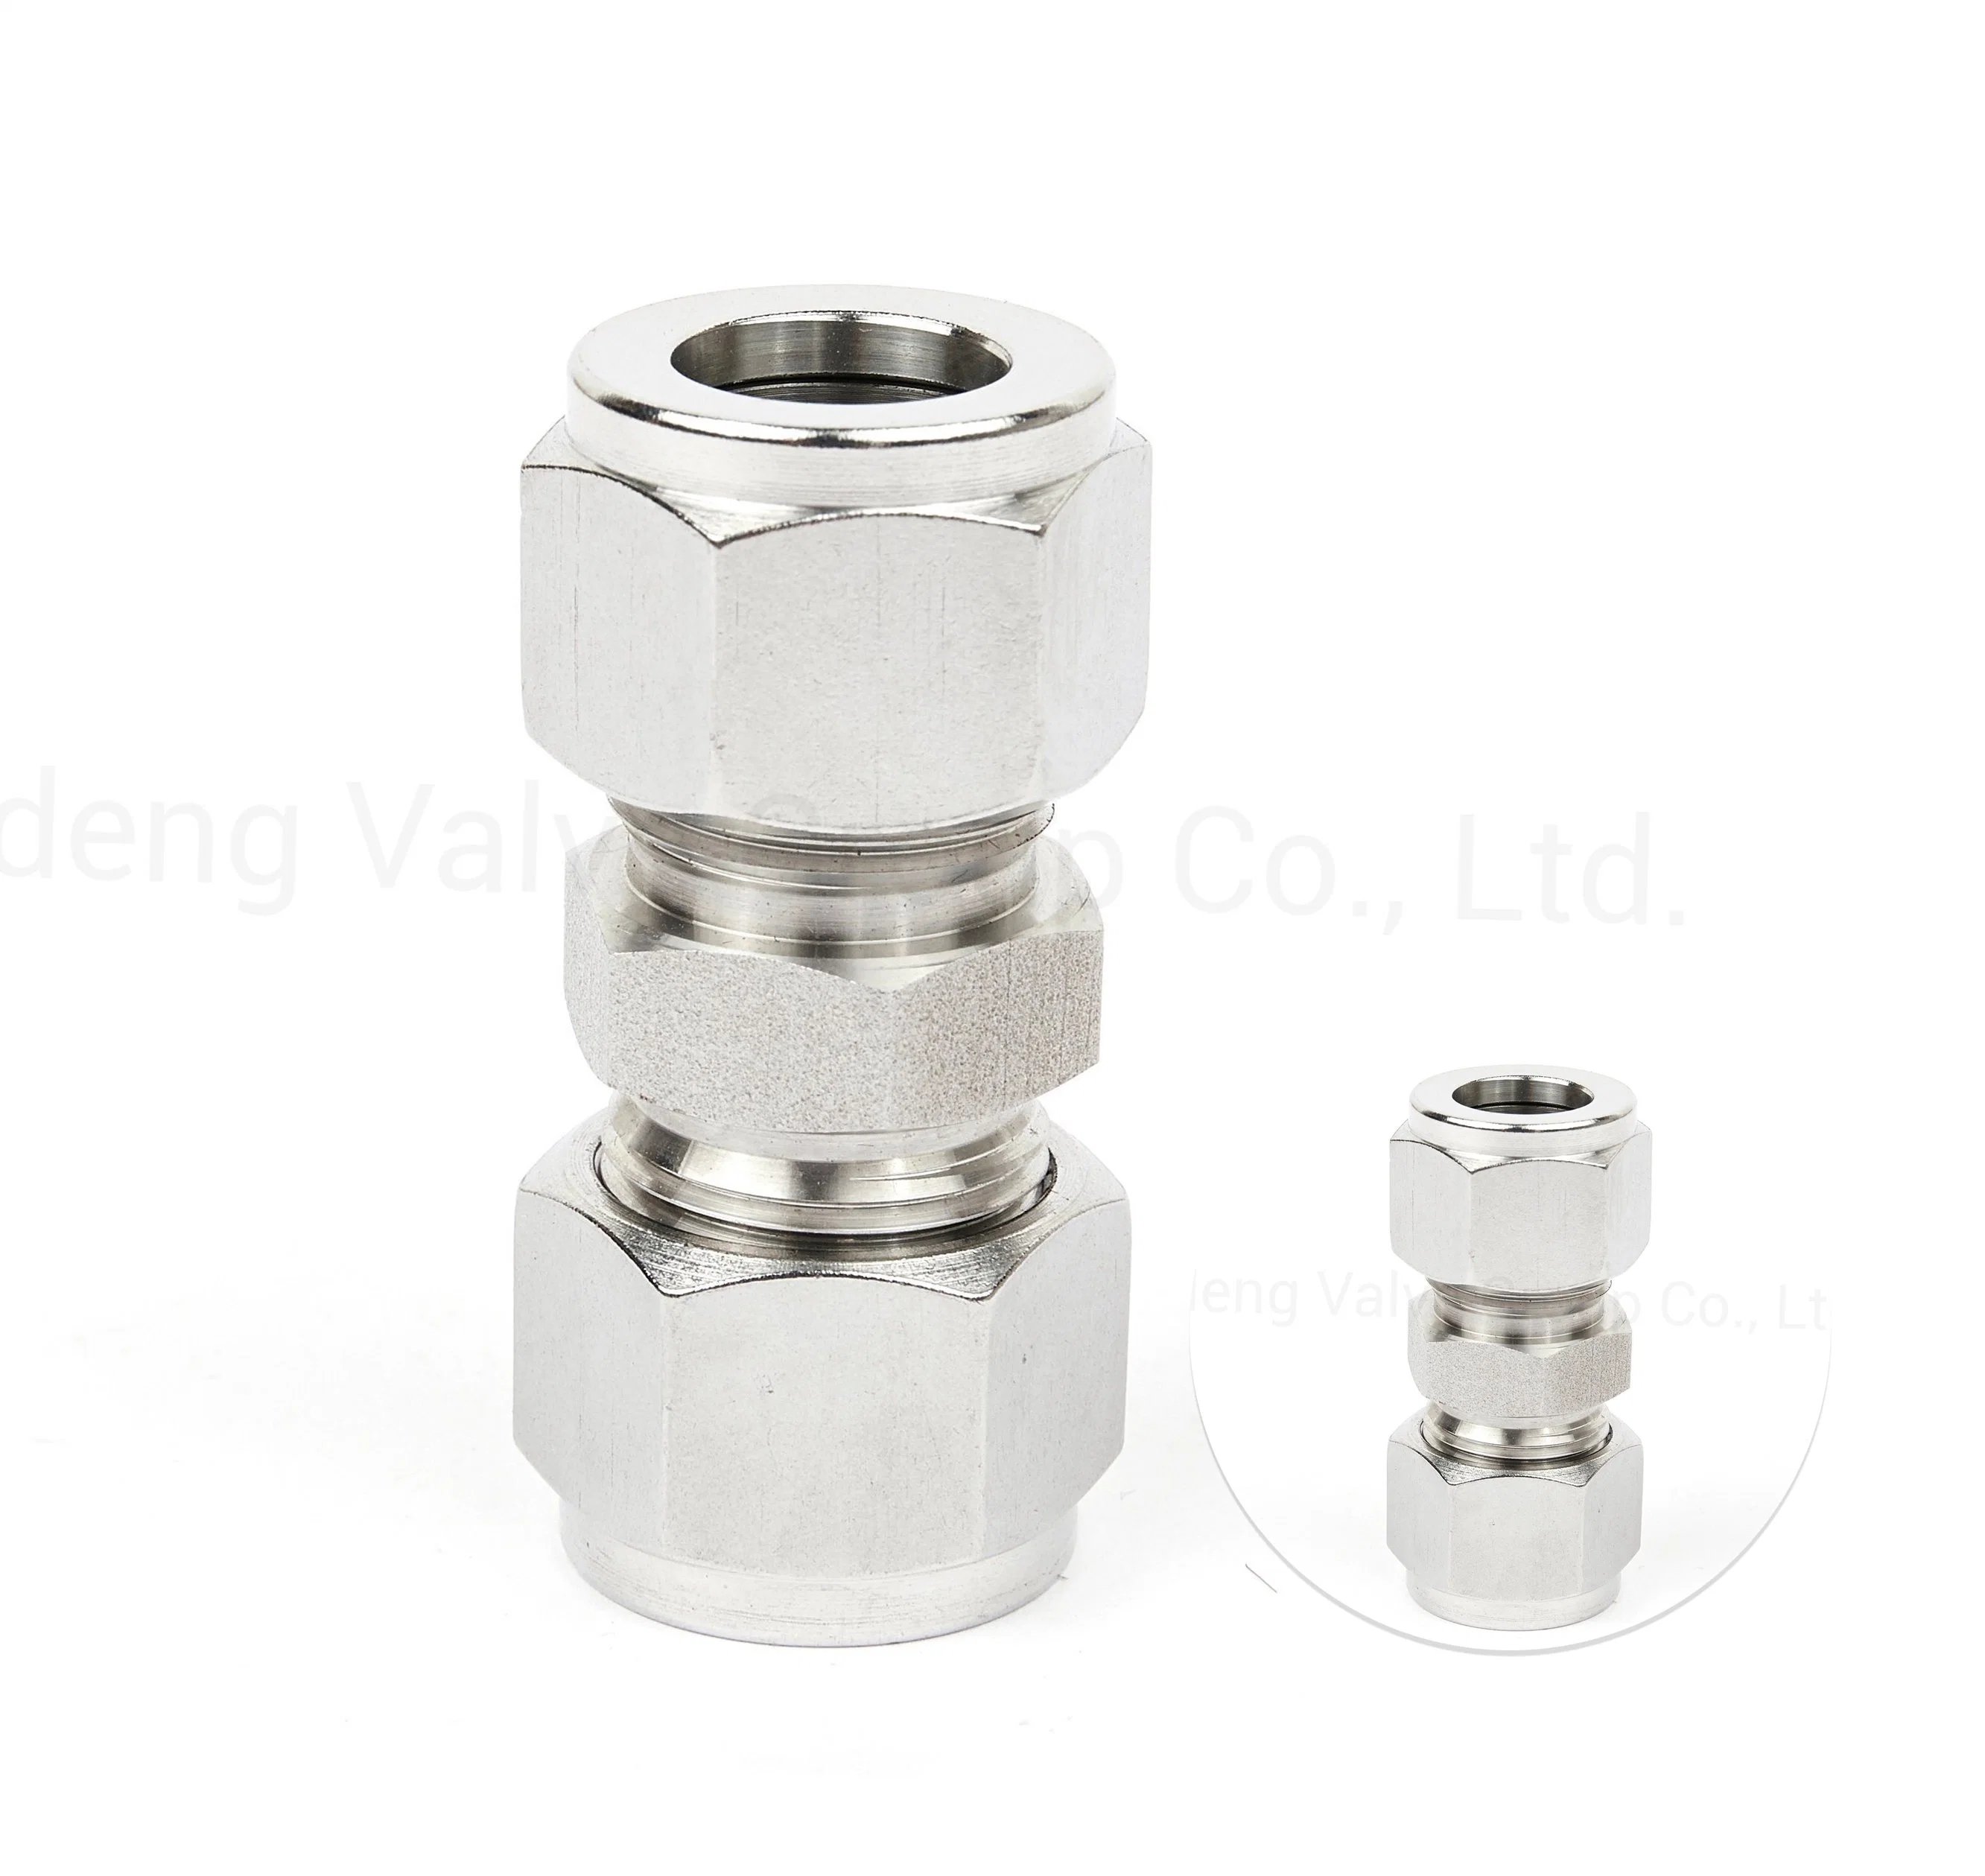 High Pressure Forged Fittings Tube Pipe Fitting Stainless Steel Straight Union Connector